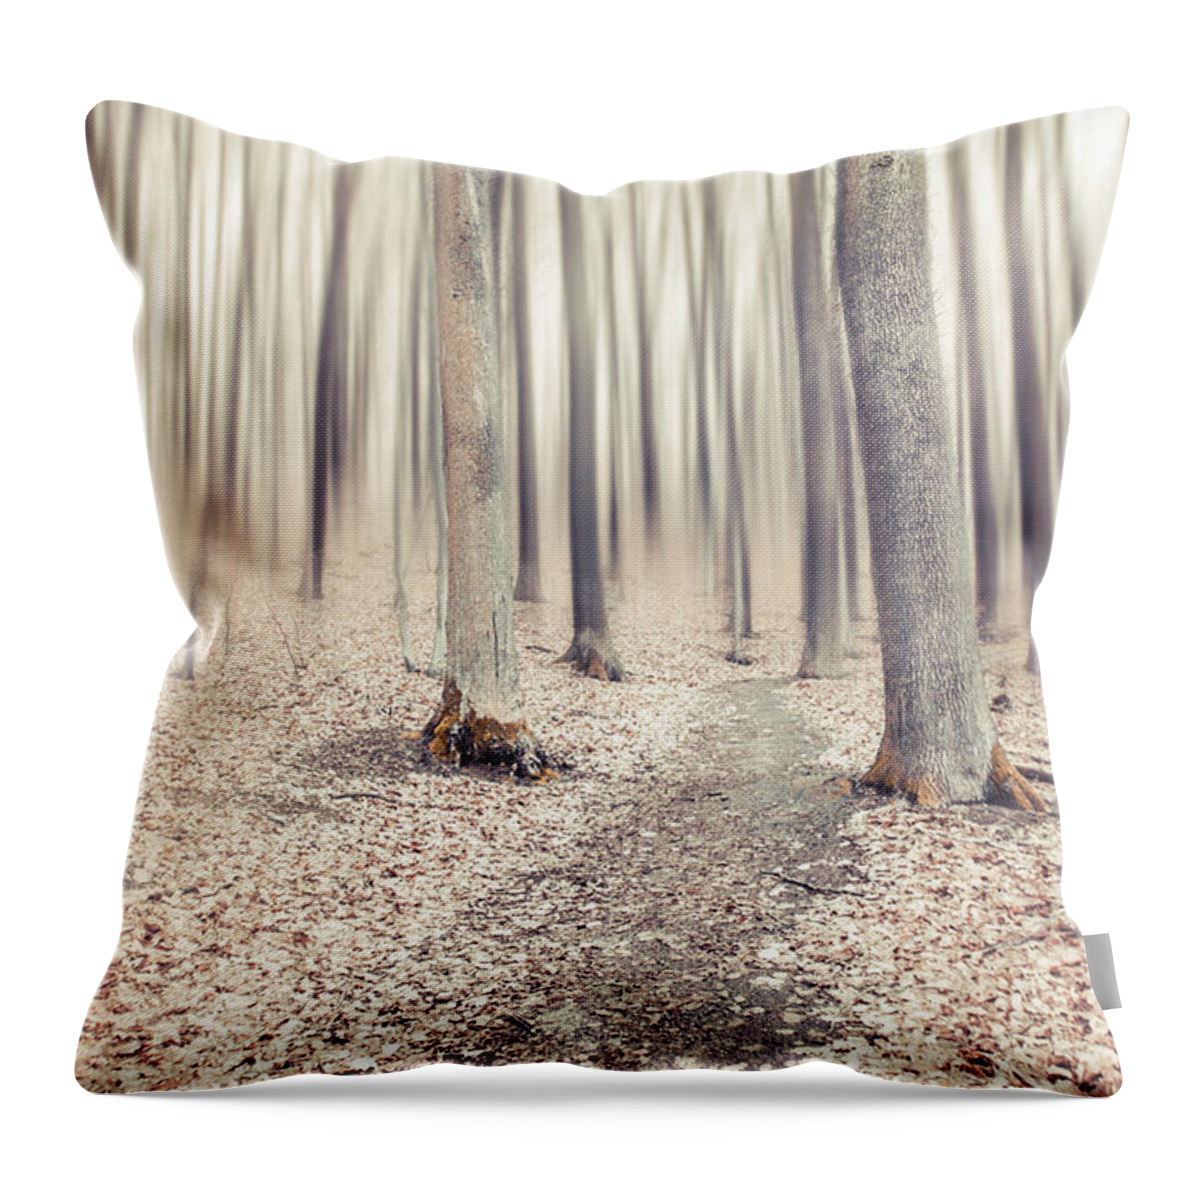 Autumn Throw Pillow featuring the photograph Steppin' Through The Last Days Of Autumn by Hannes Cmarits